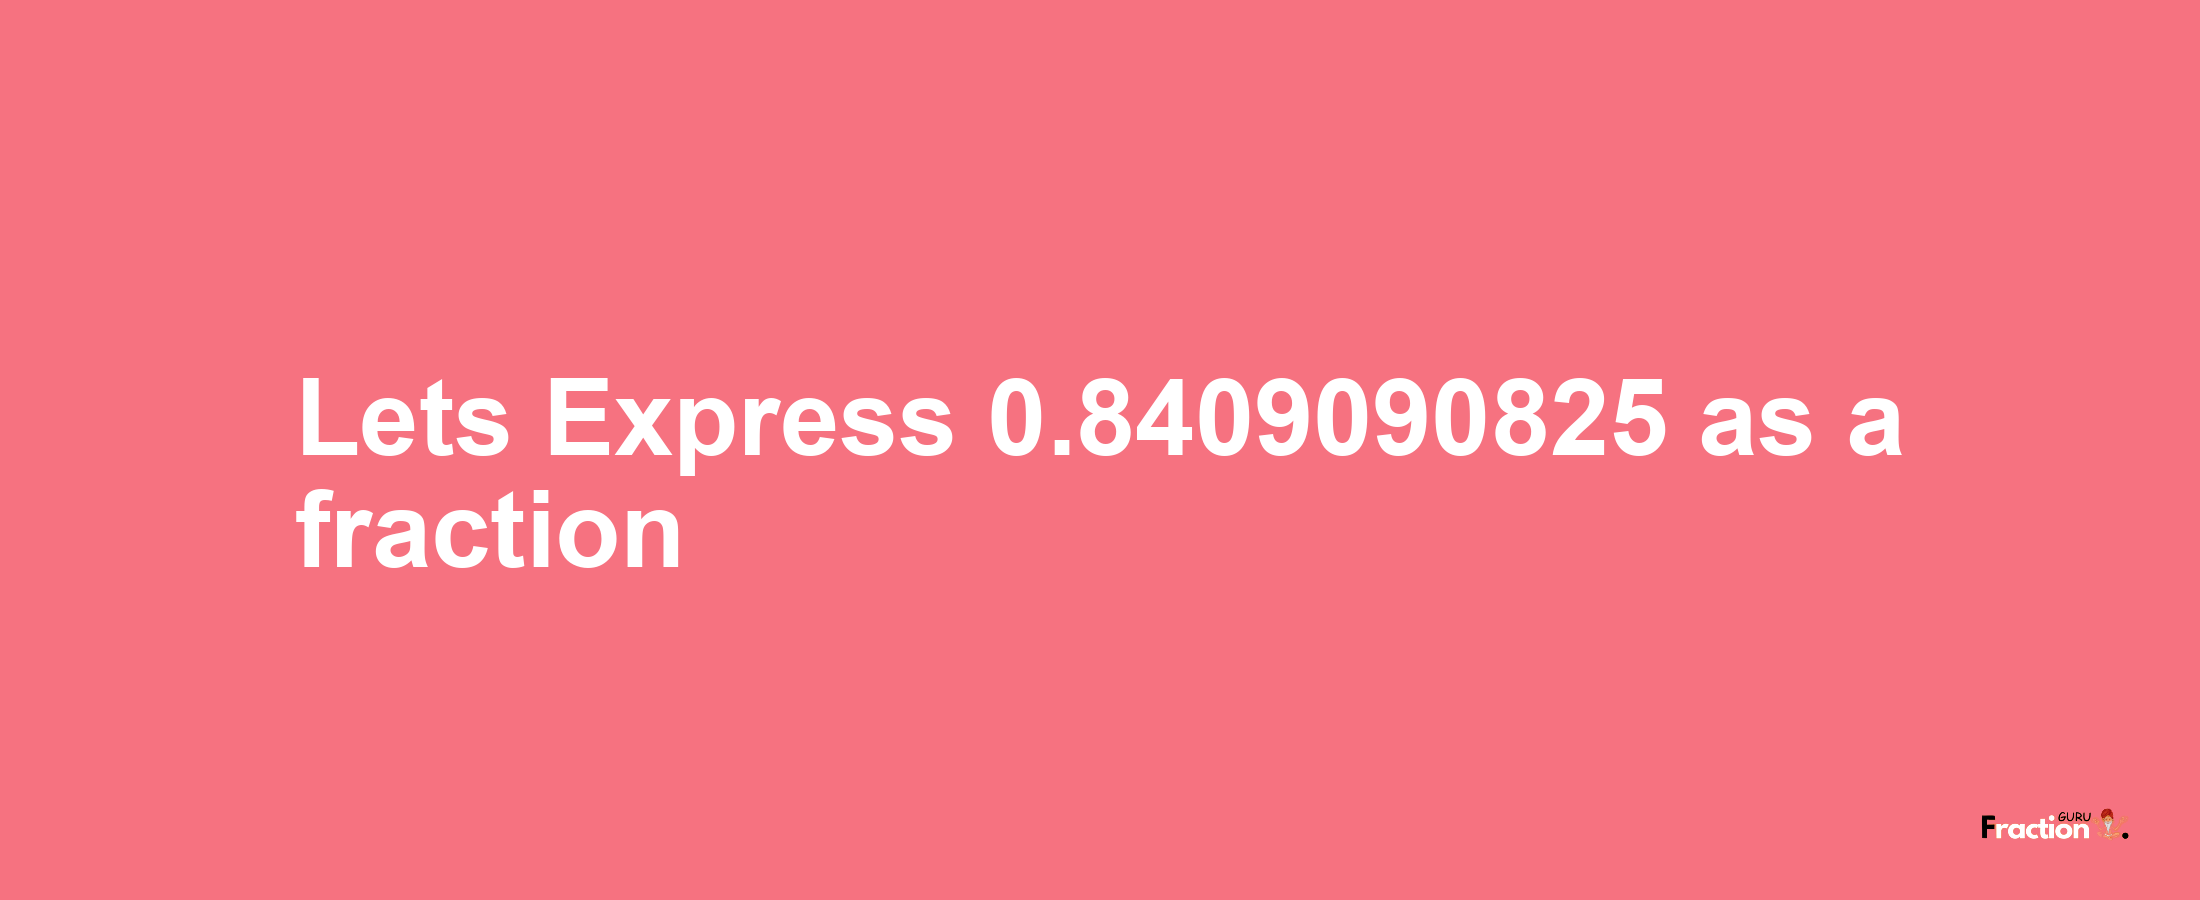 Lets Express 0.8409090825 as afraction